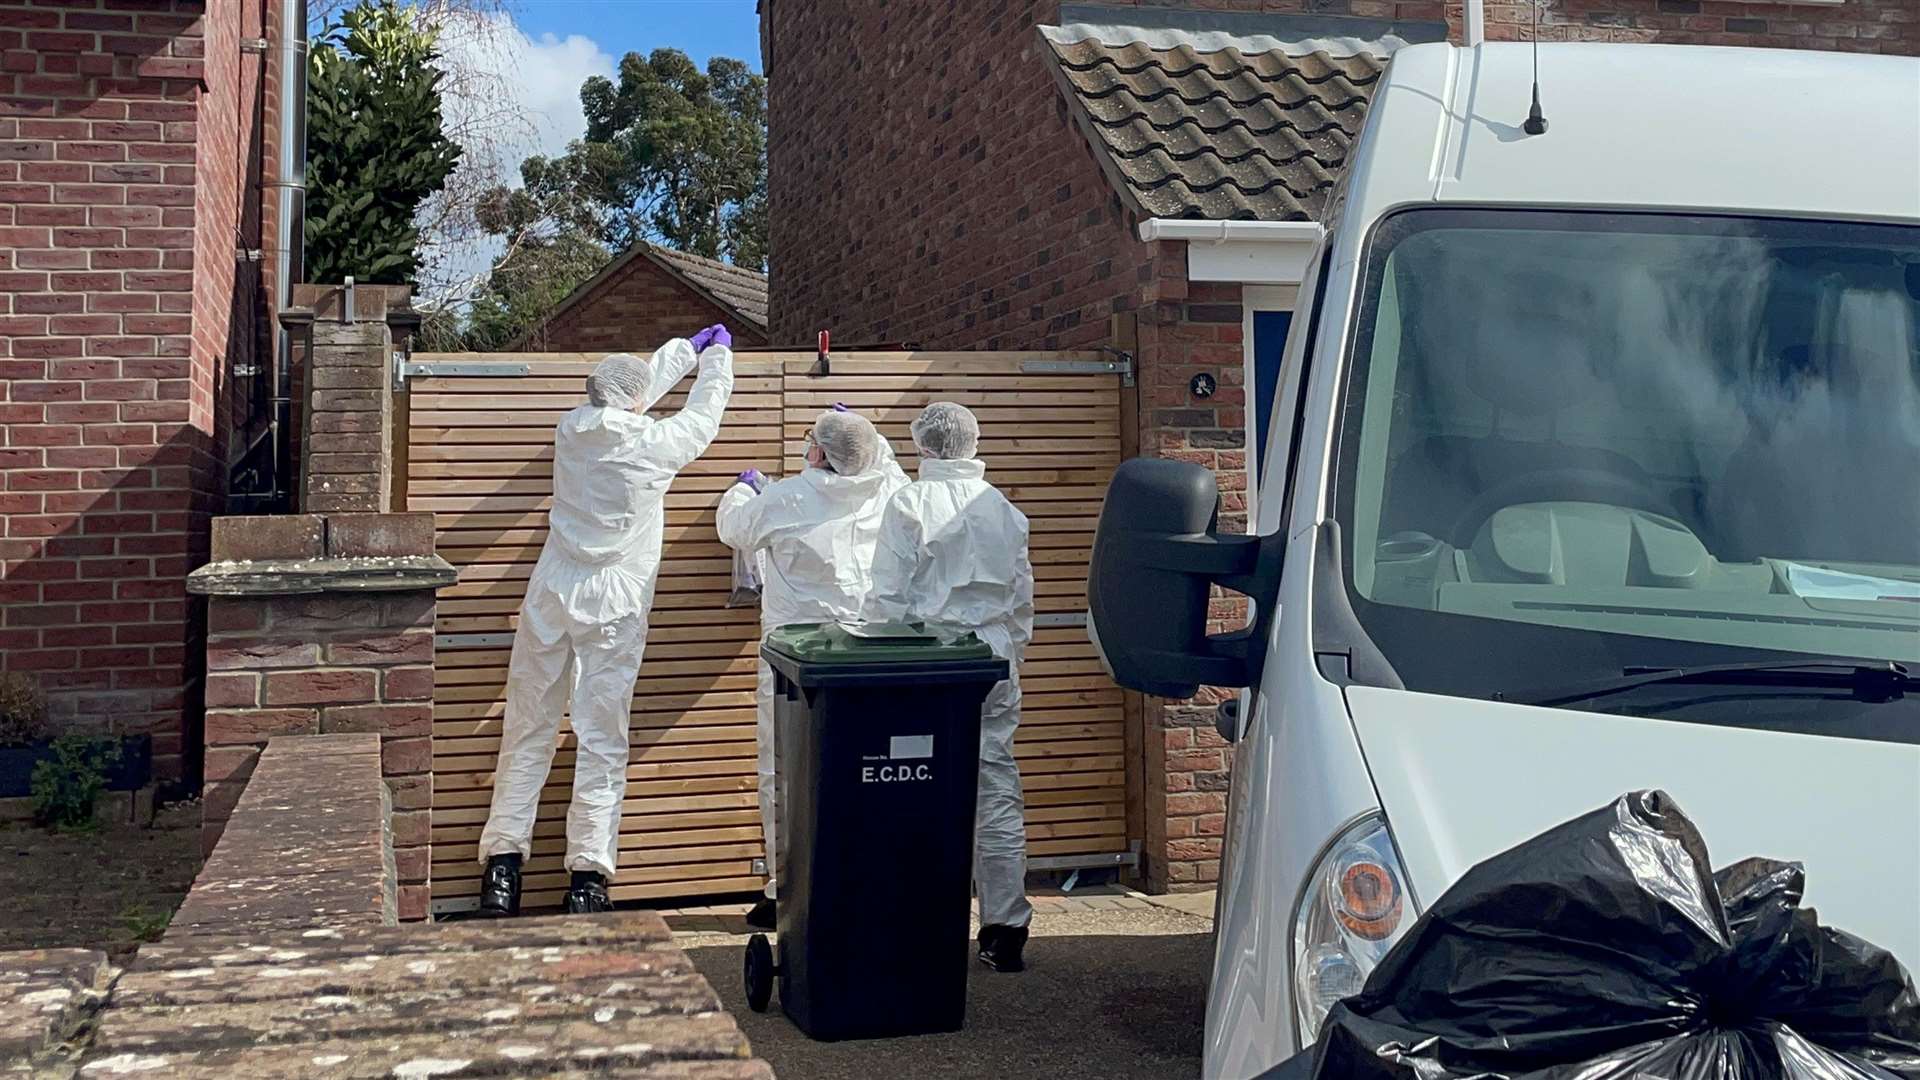 Forensics officers at the scene in The Row in Sutton, near Ely, Cambridgeshire, where police found the body of a 57-year-old man who had died from gunshot wounds (Joe Giddens/ PA)